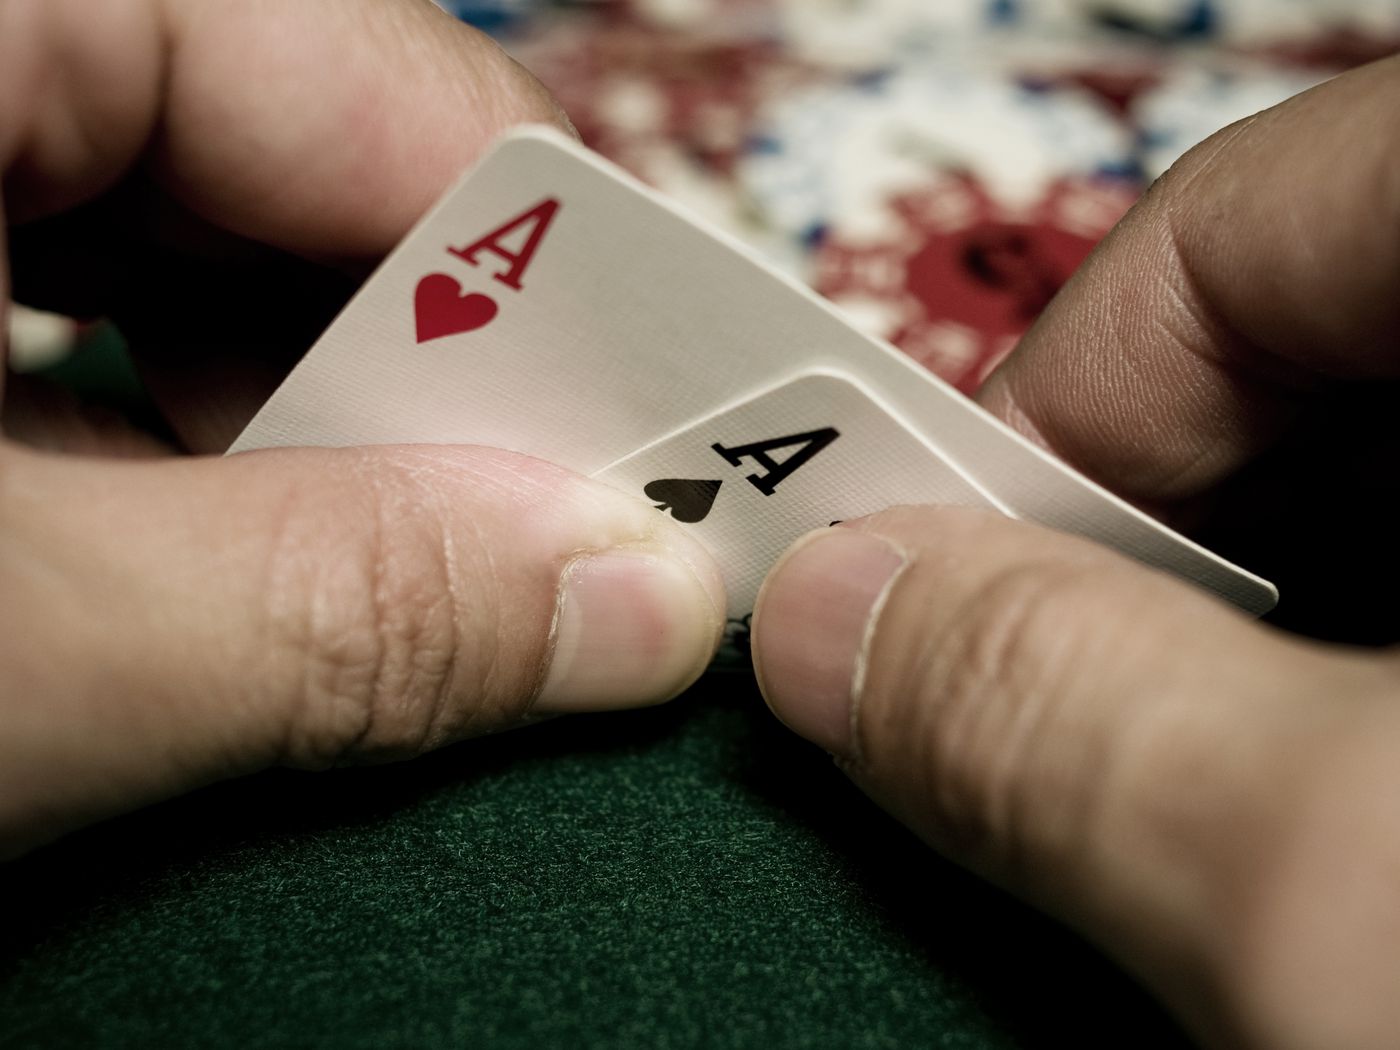 Small stakes online poker, explained by an expert - Vox